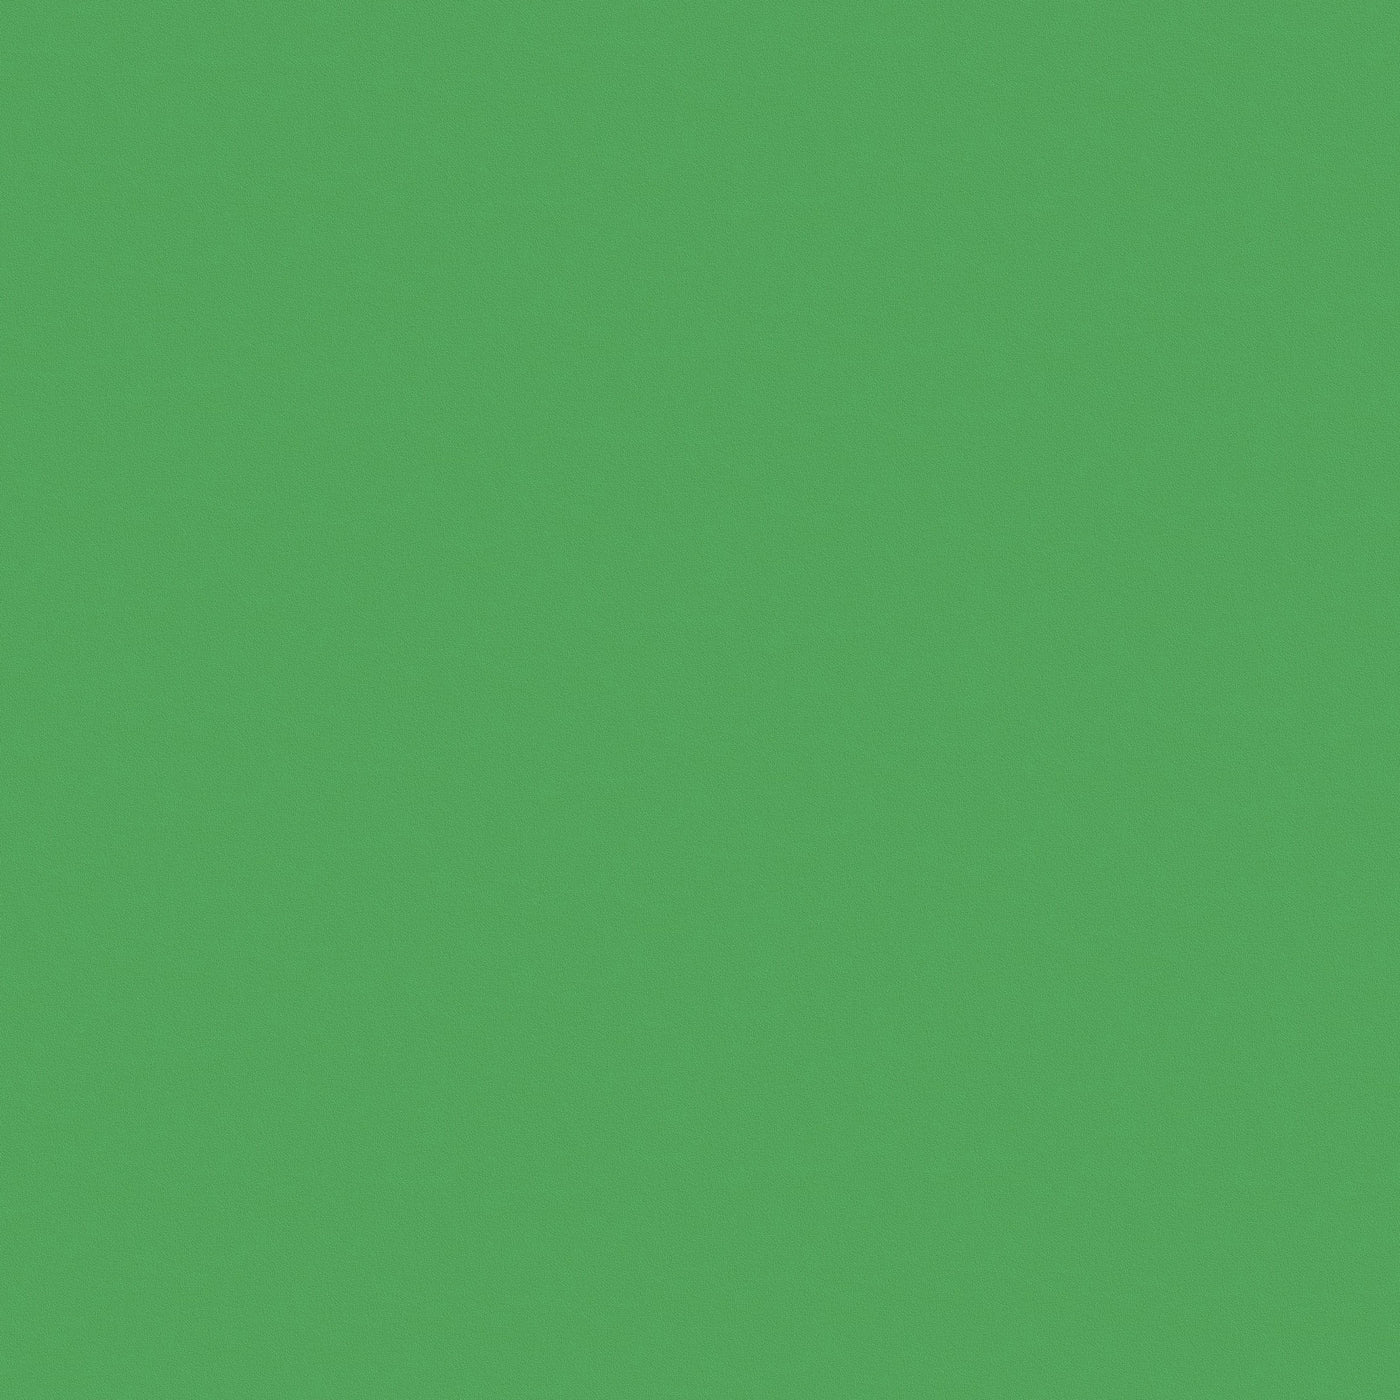 BRIGHT GREEN -  12x12 smooth cardstock that cuts great from Lessebo Paper